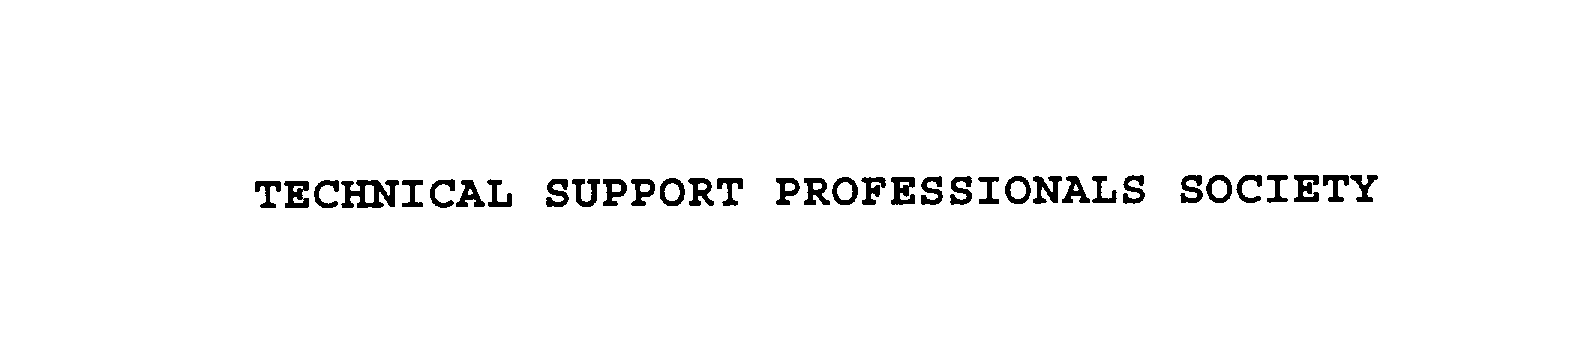  TECHNICAL SUPPORT PROFESSIONALS SOCIETY